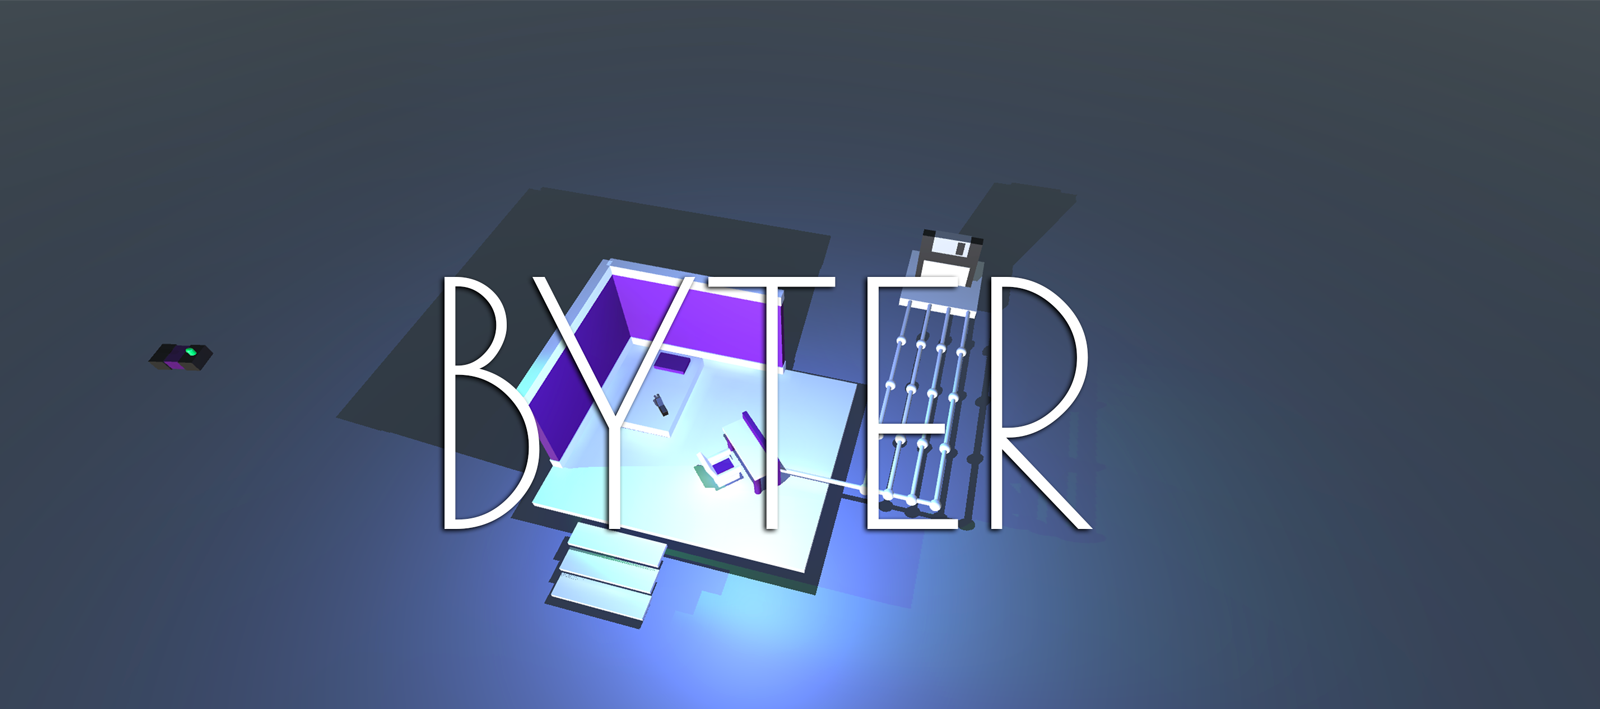 Byter, Open Source Clicker Game for GitHub Game Off 2016